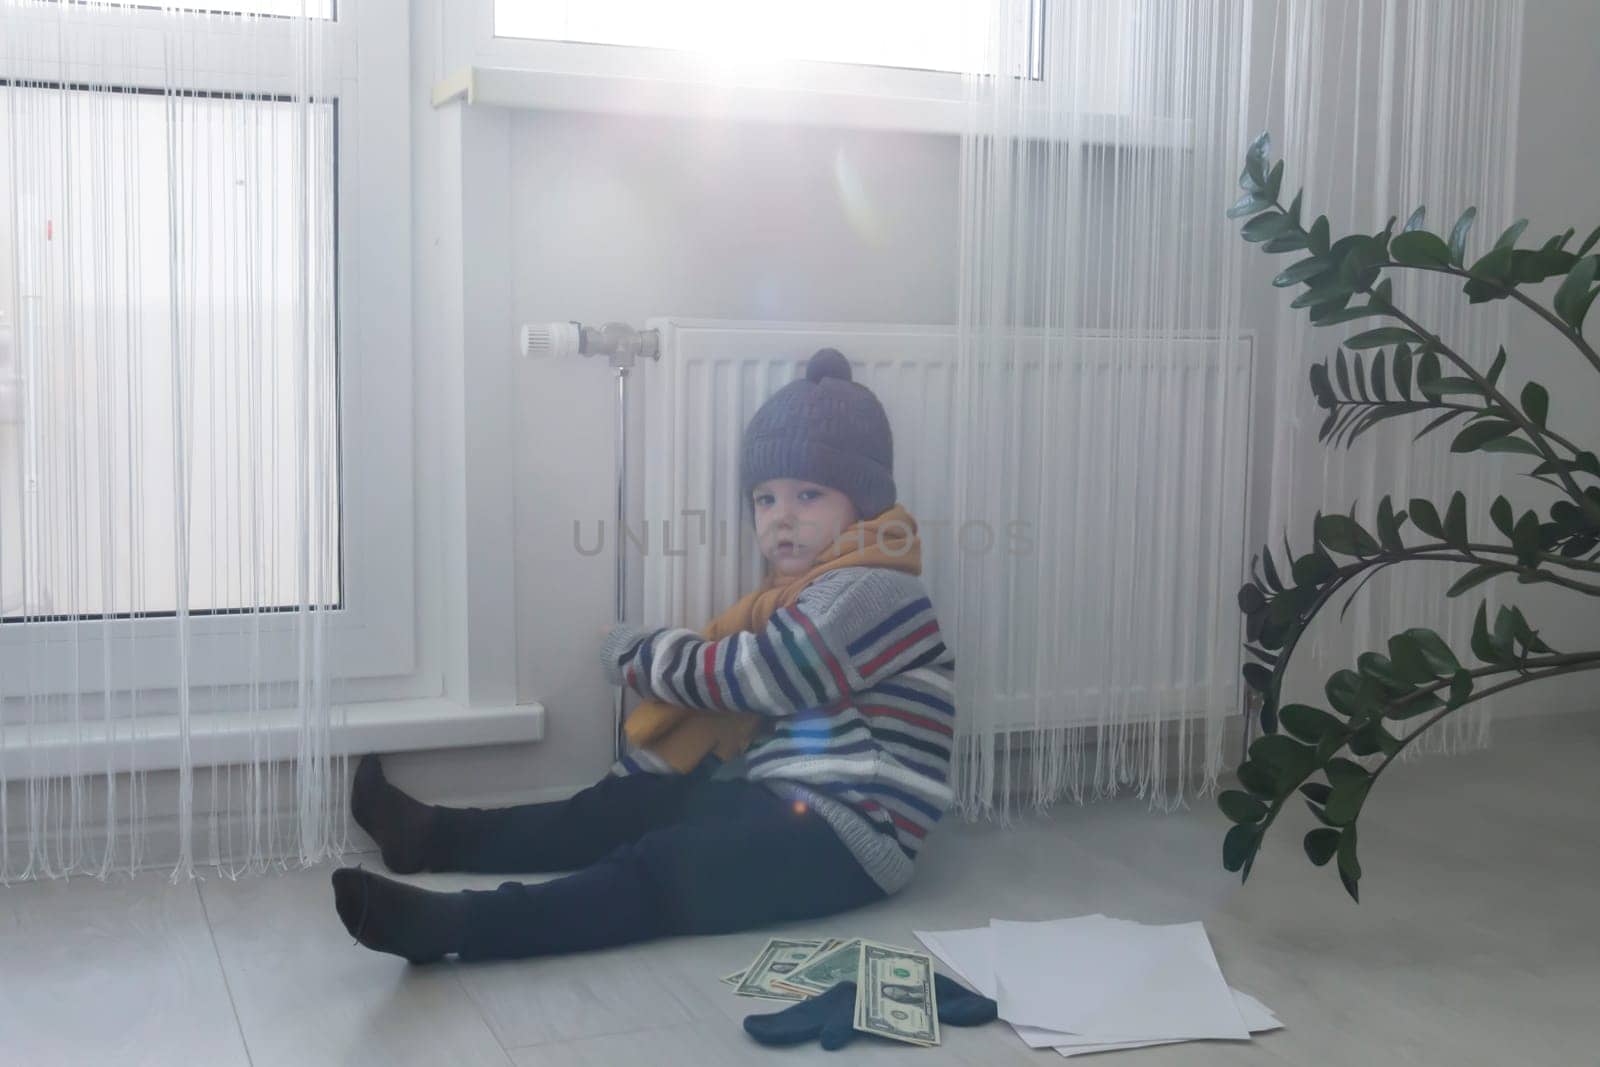 The child is warmly dressed in a sweater and a hat, sitting and holding on to the radiator. The concept of the economic crisis and the lack of heat and heating in homes